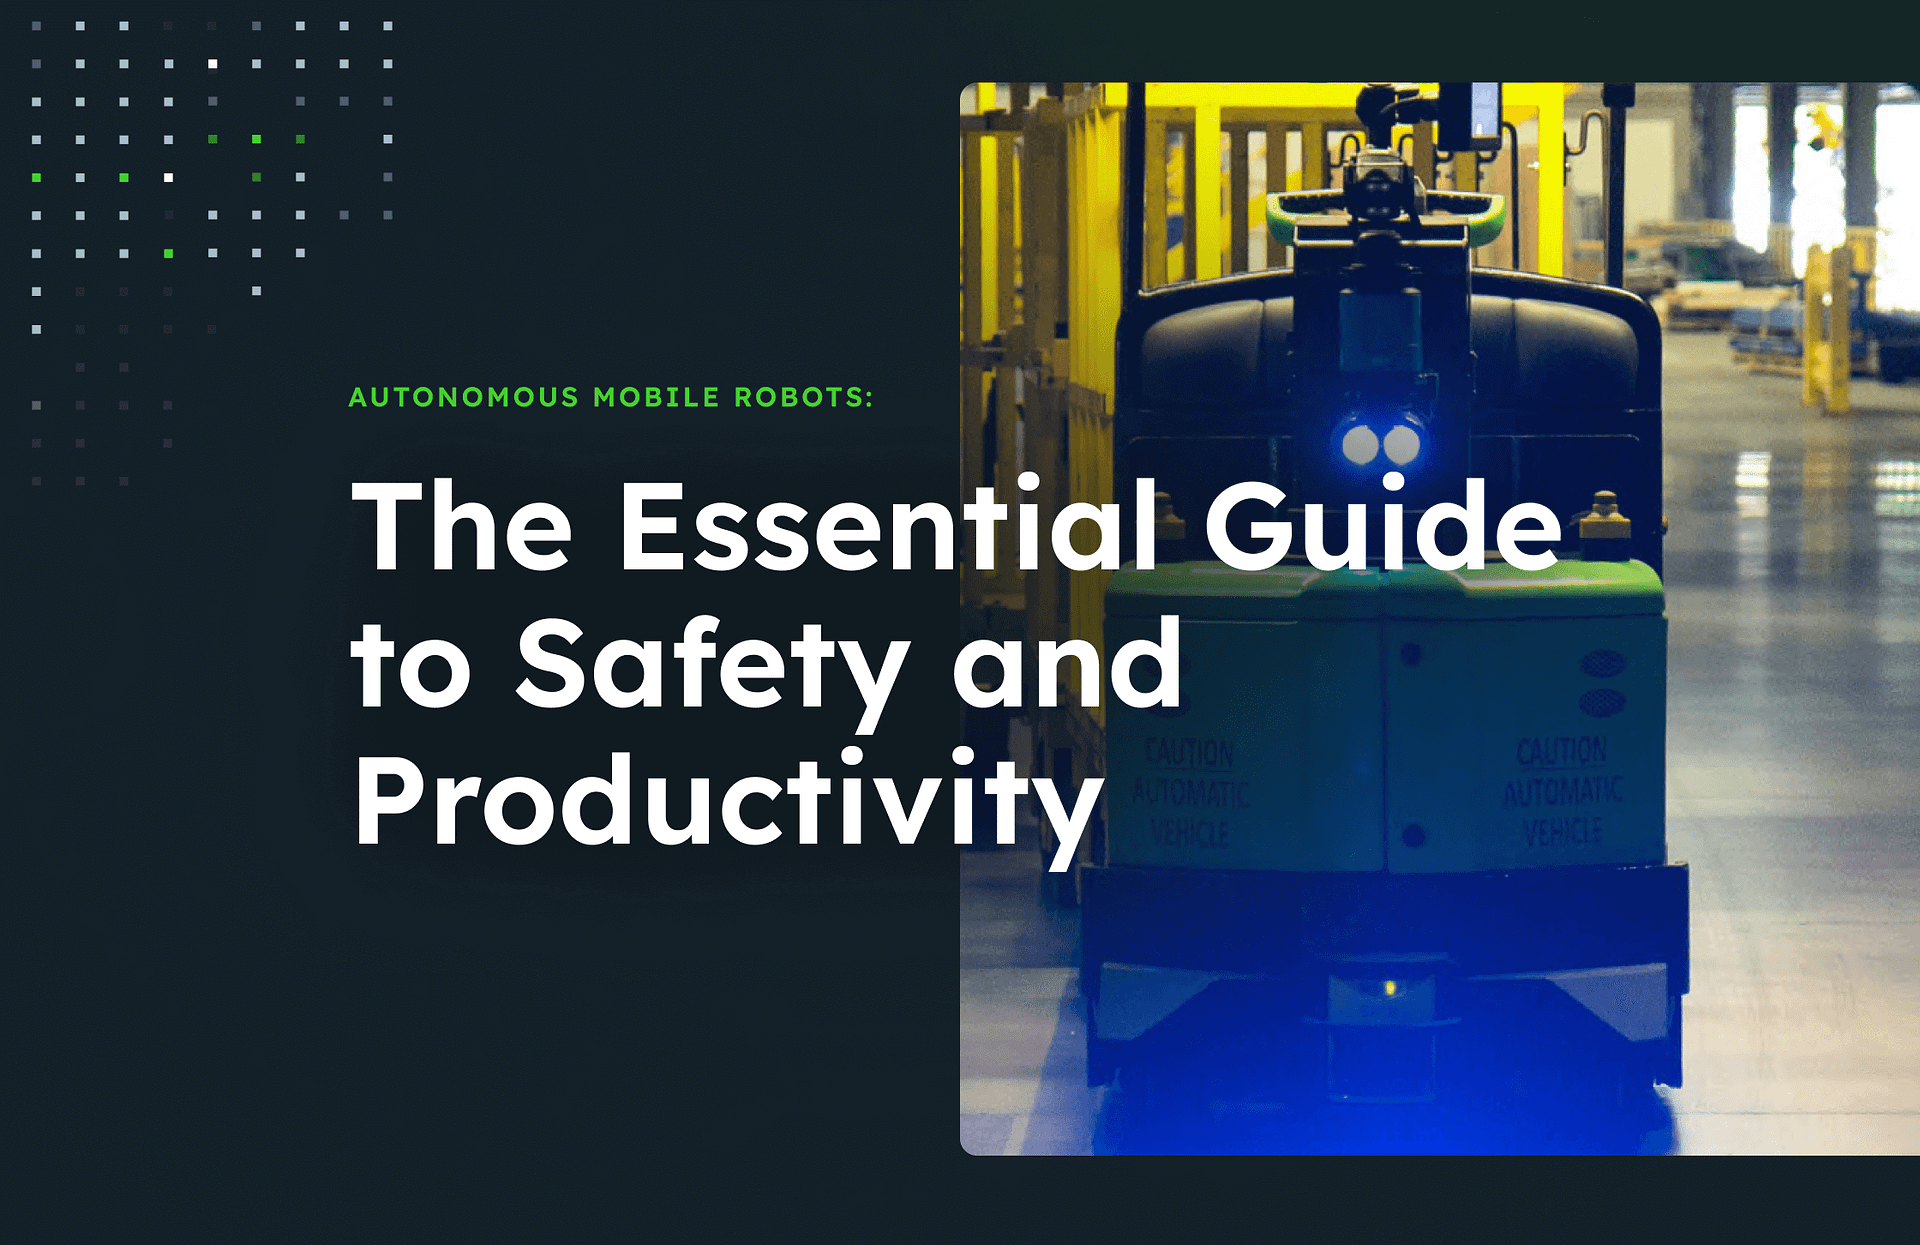 The Essential Guide to Safety and Productivity text on an image of an AMR